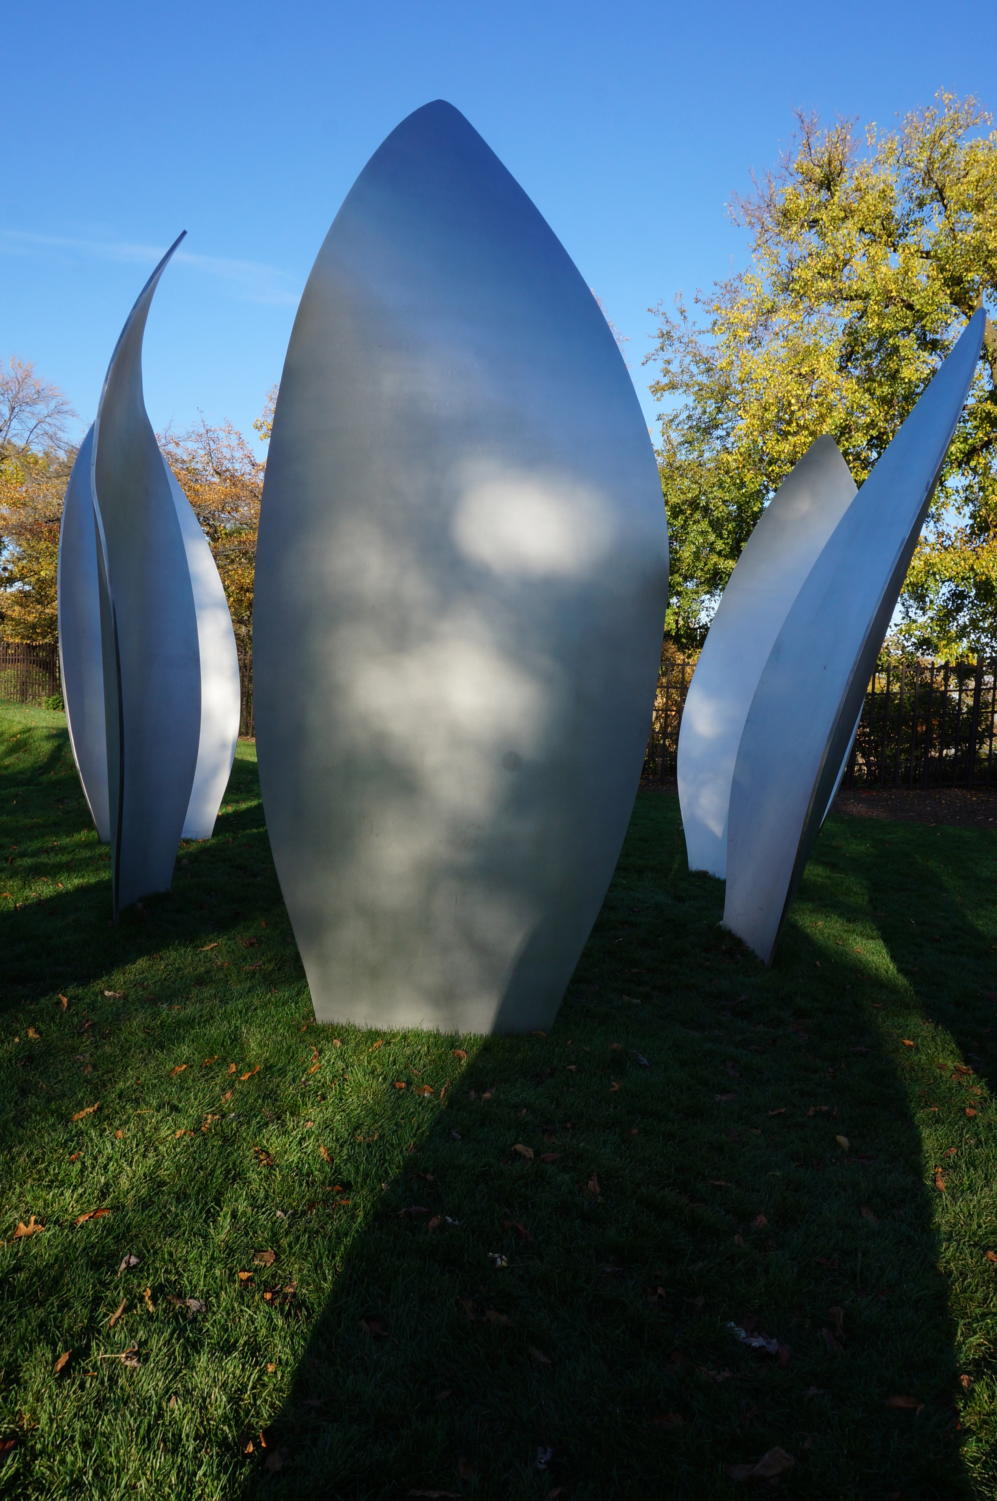 Yoko Ono's sculpture in Hyde Park features petal-like shapes.